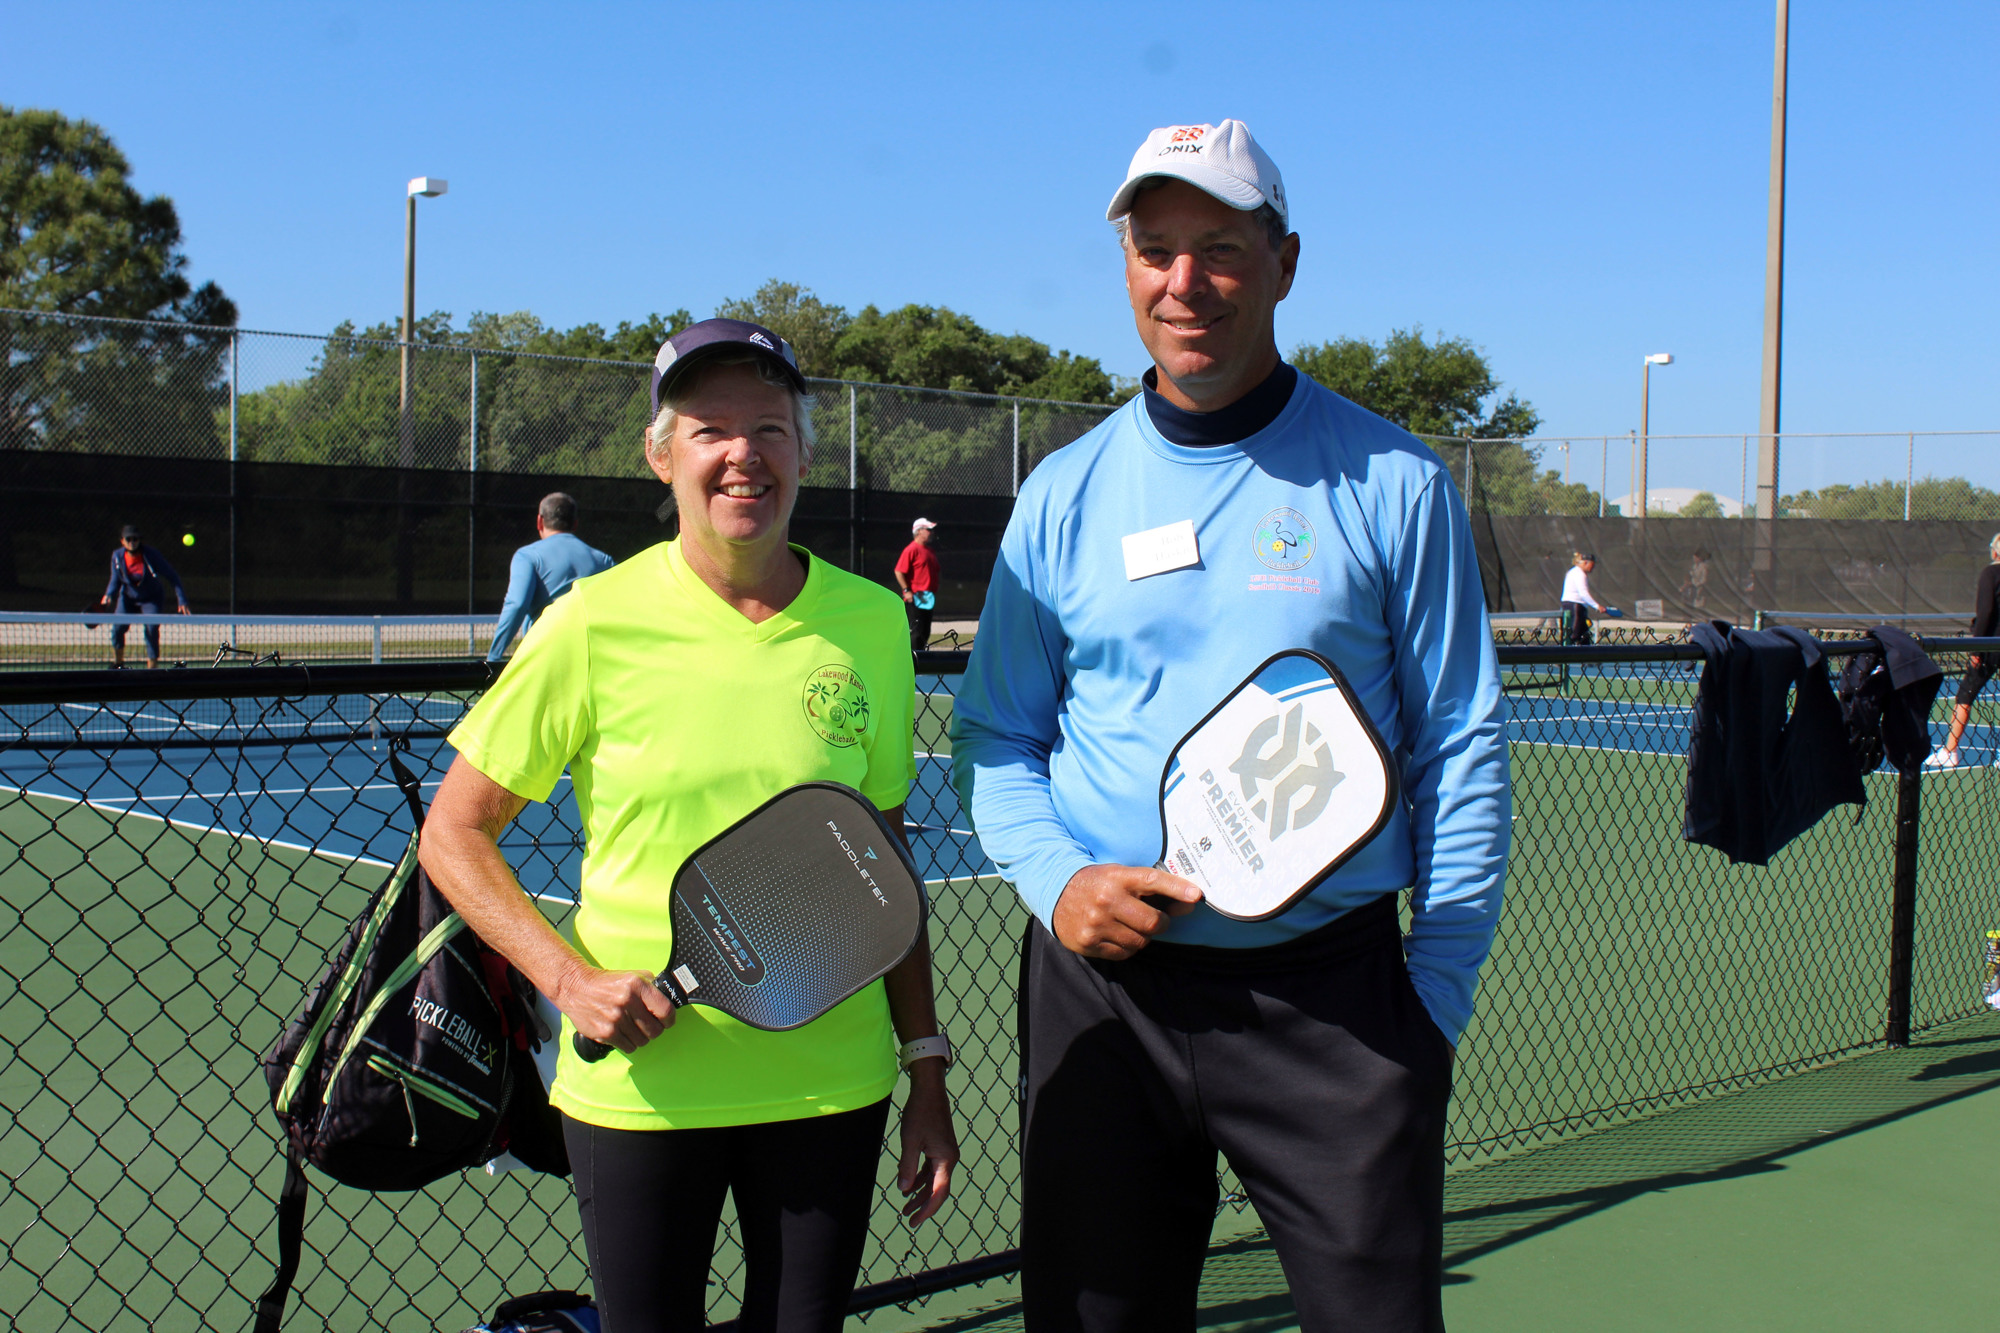 In three years, Vice President Carol Lucas and President Bob Haskin turned Lakewood Ranch Pickleball Club’s 40 volunteers into more than 515 members.